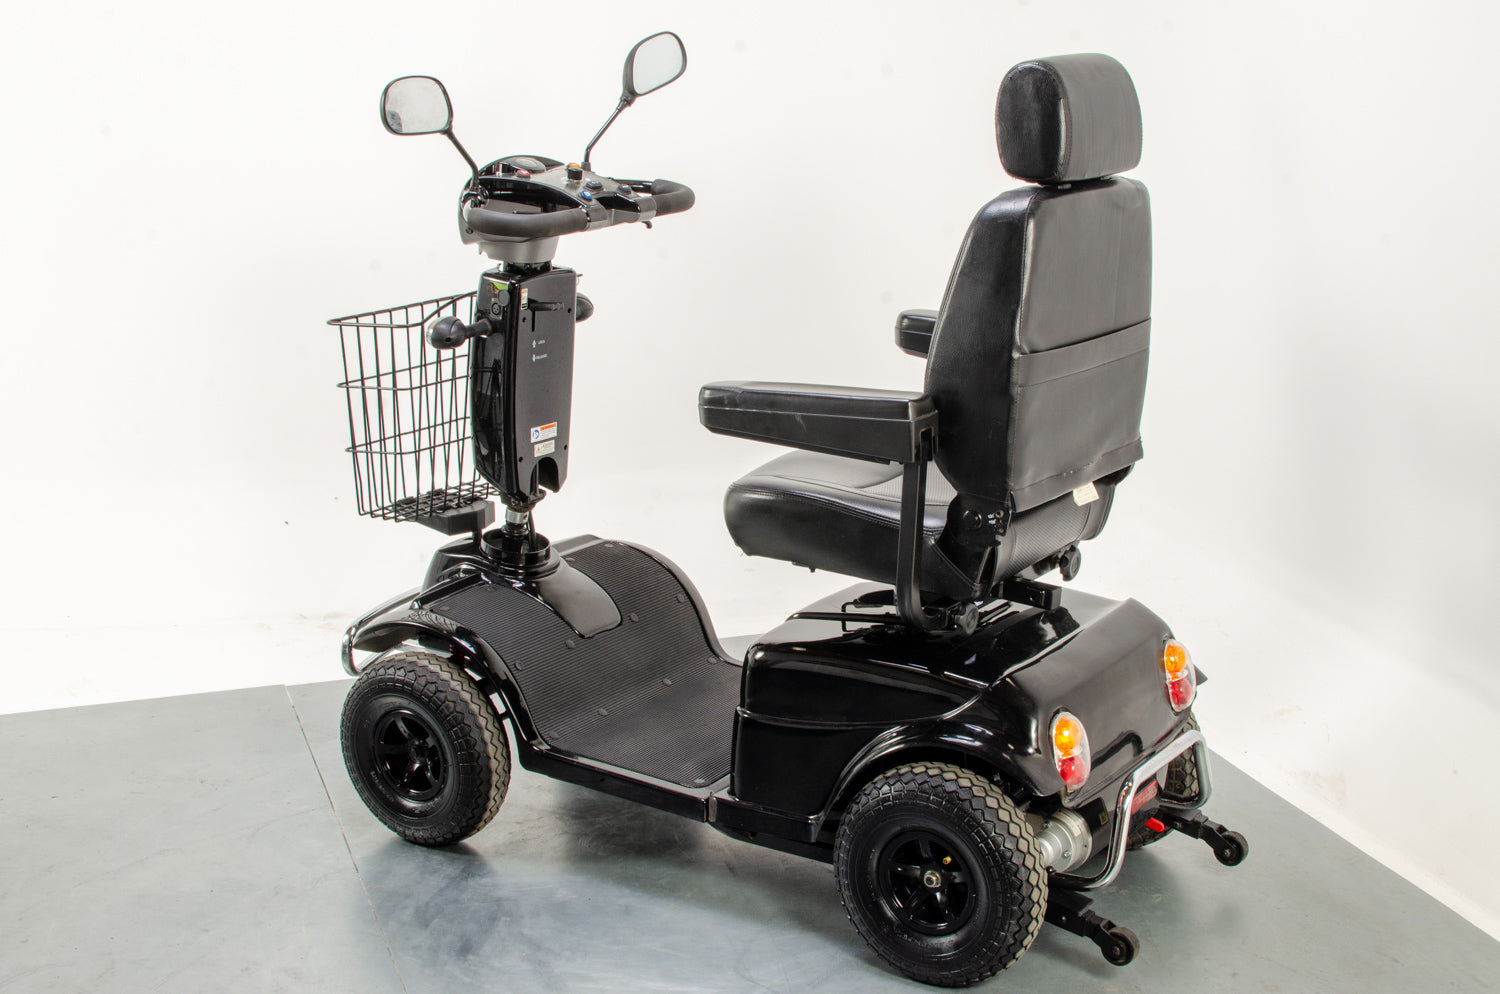 Rascal Pioneer Used Electric Mobility Scooter All-Terrain Suspension Off-Road